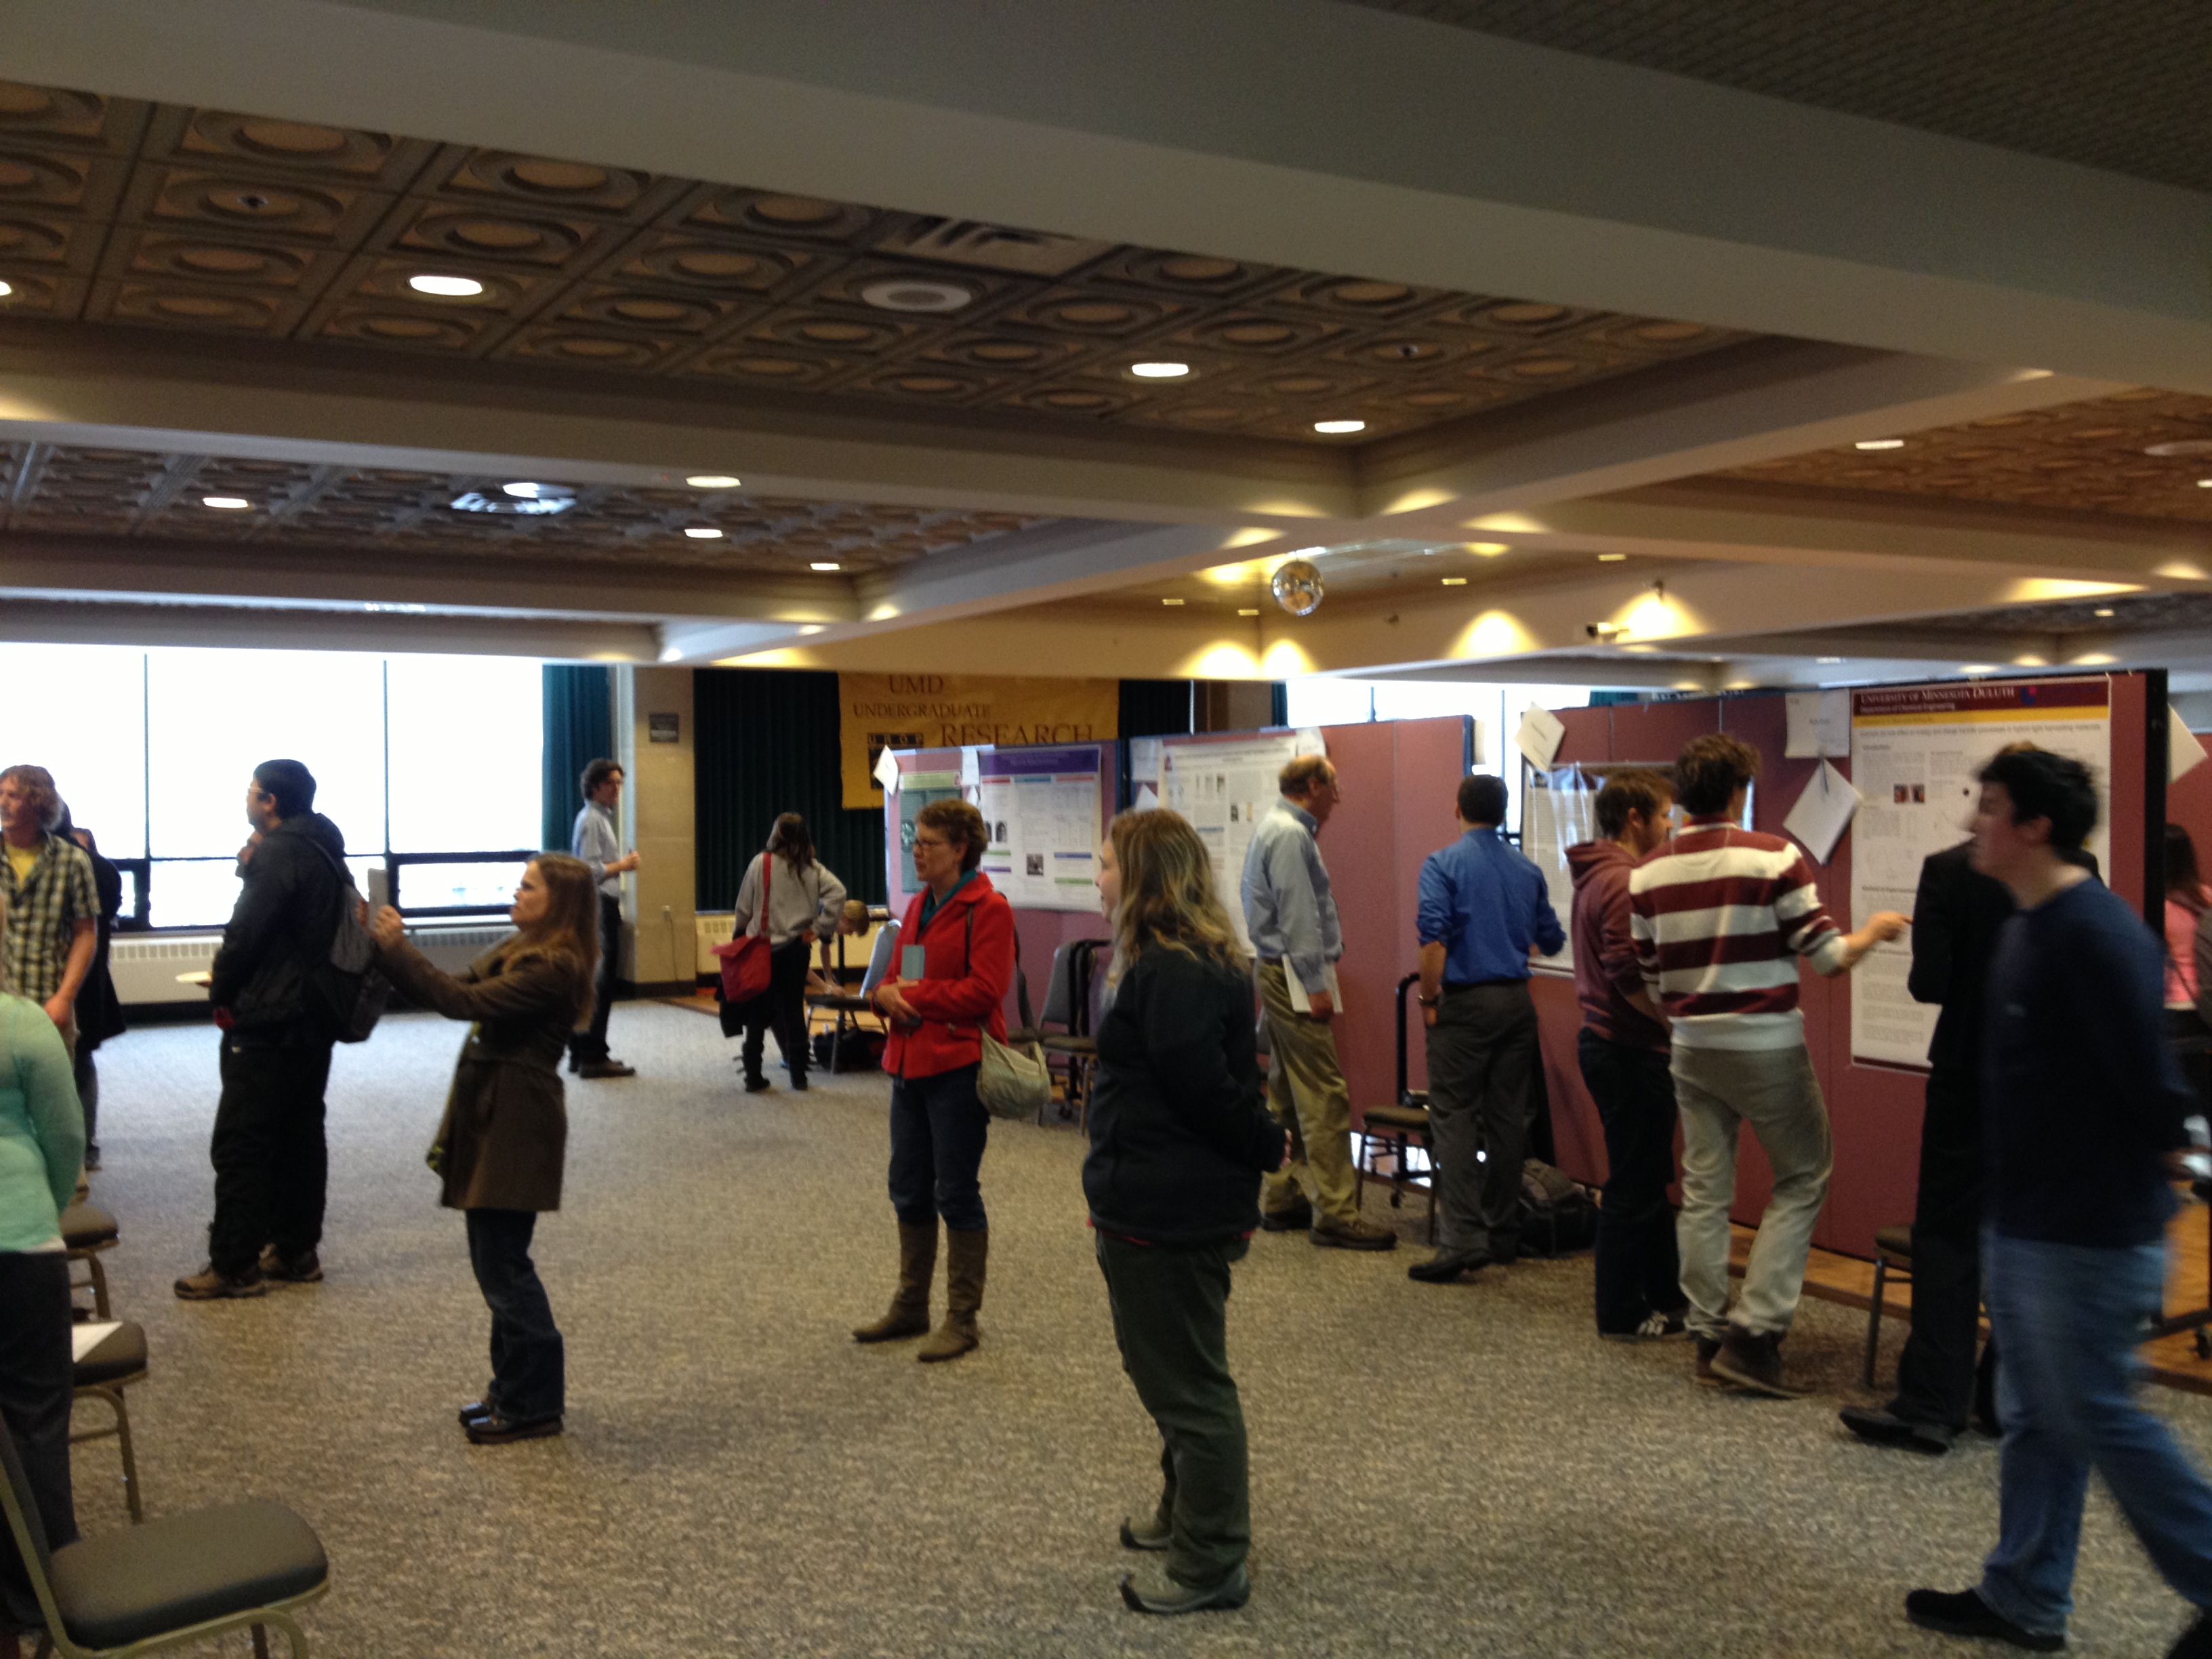 People observing student presentations at the UMD Showcase